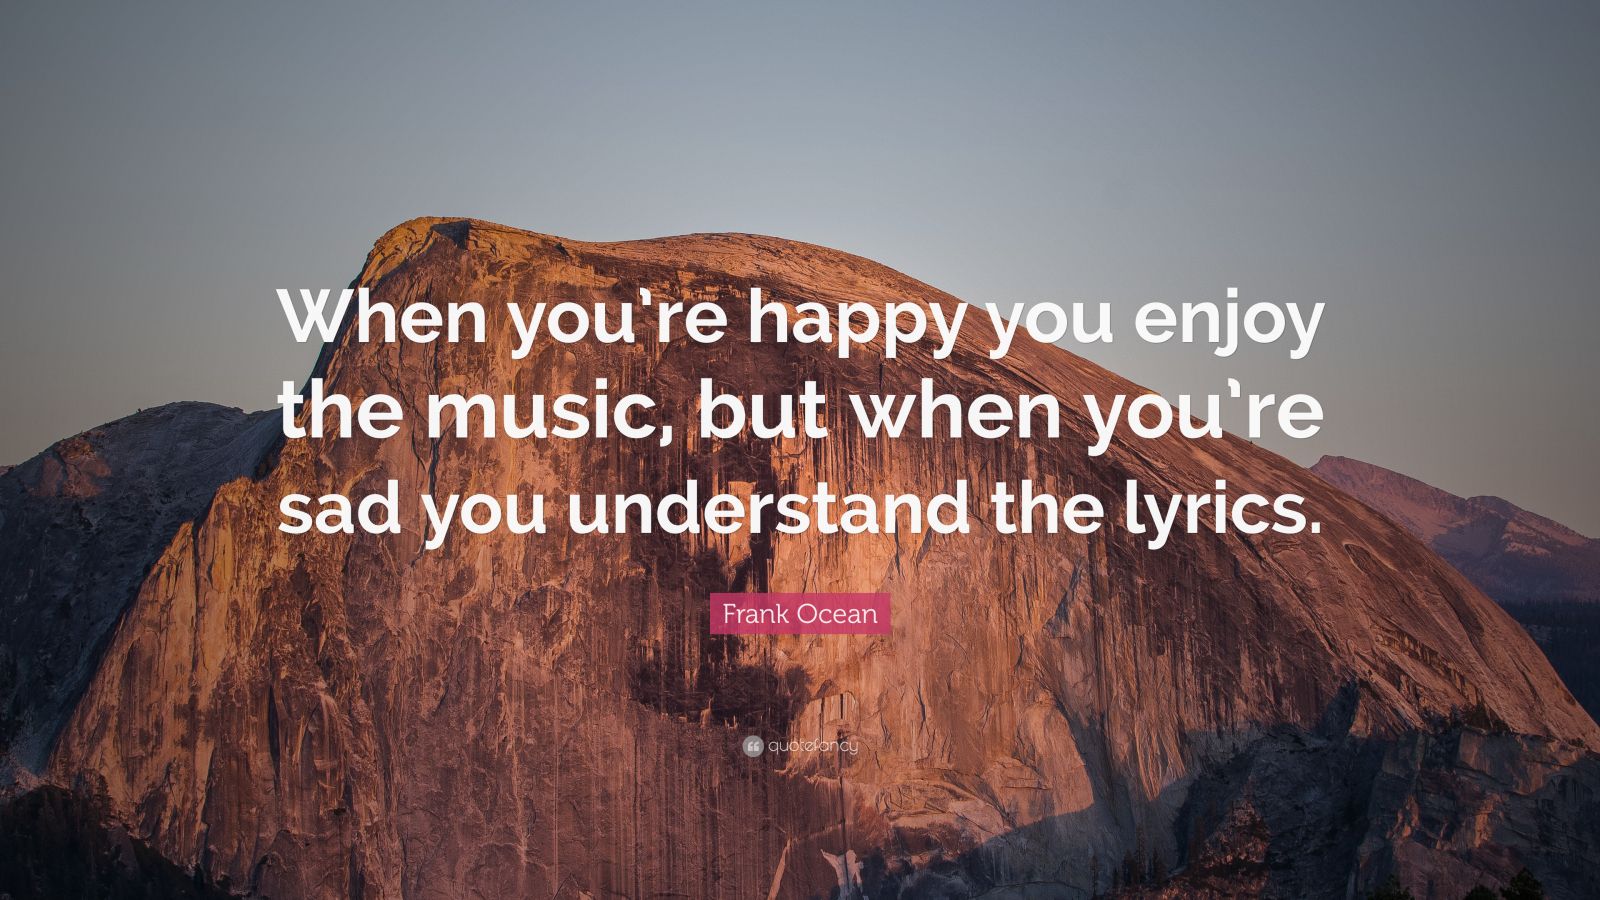 Frank Ocean Quote: "When you're happy you enjoy the music ...